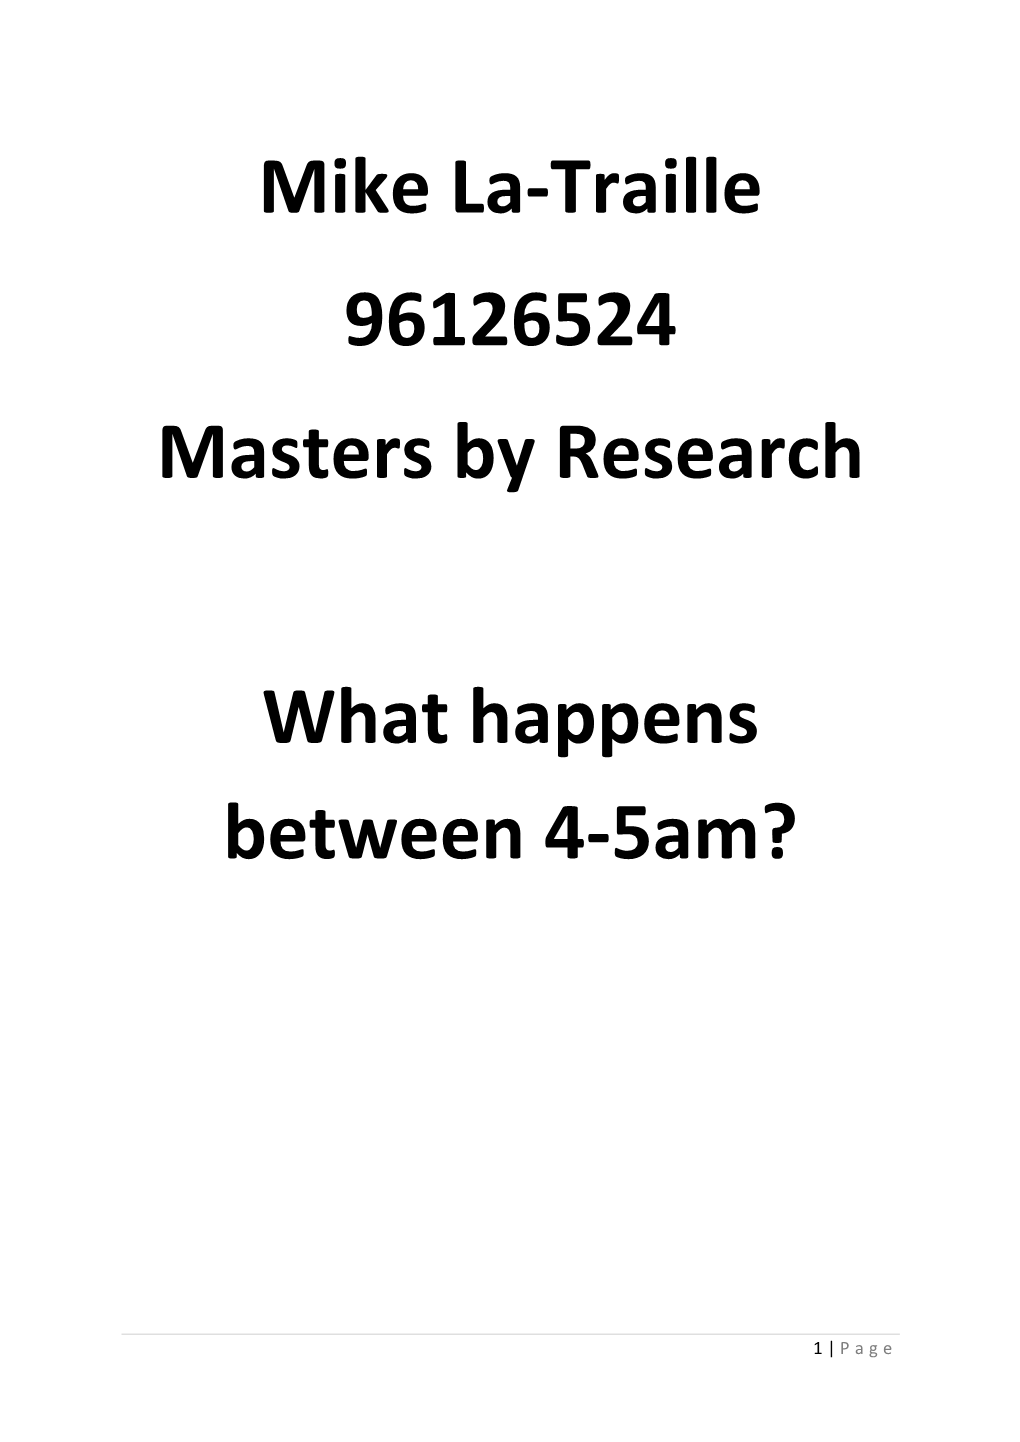 Mike La-Traille 96126524 Masters by Research What Happens Between 4